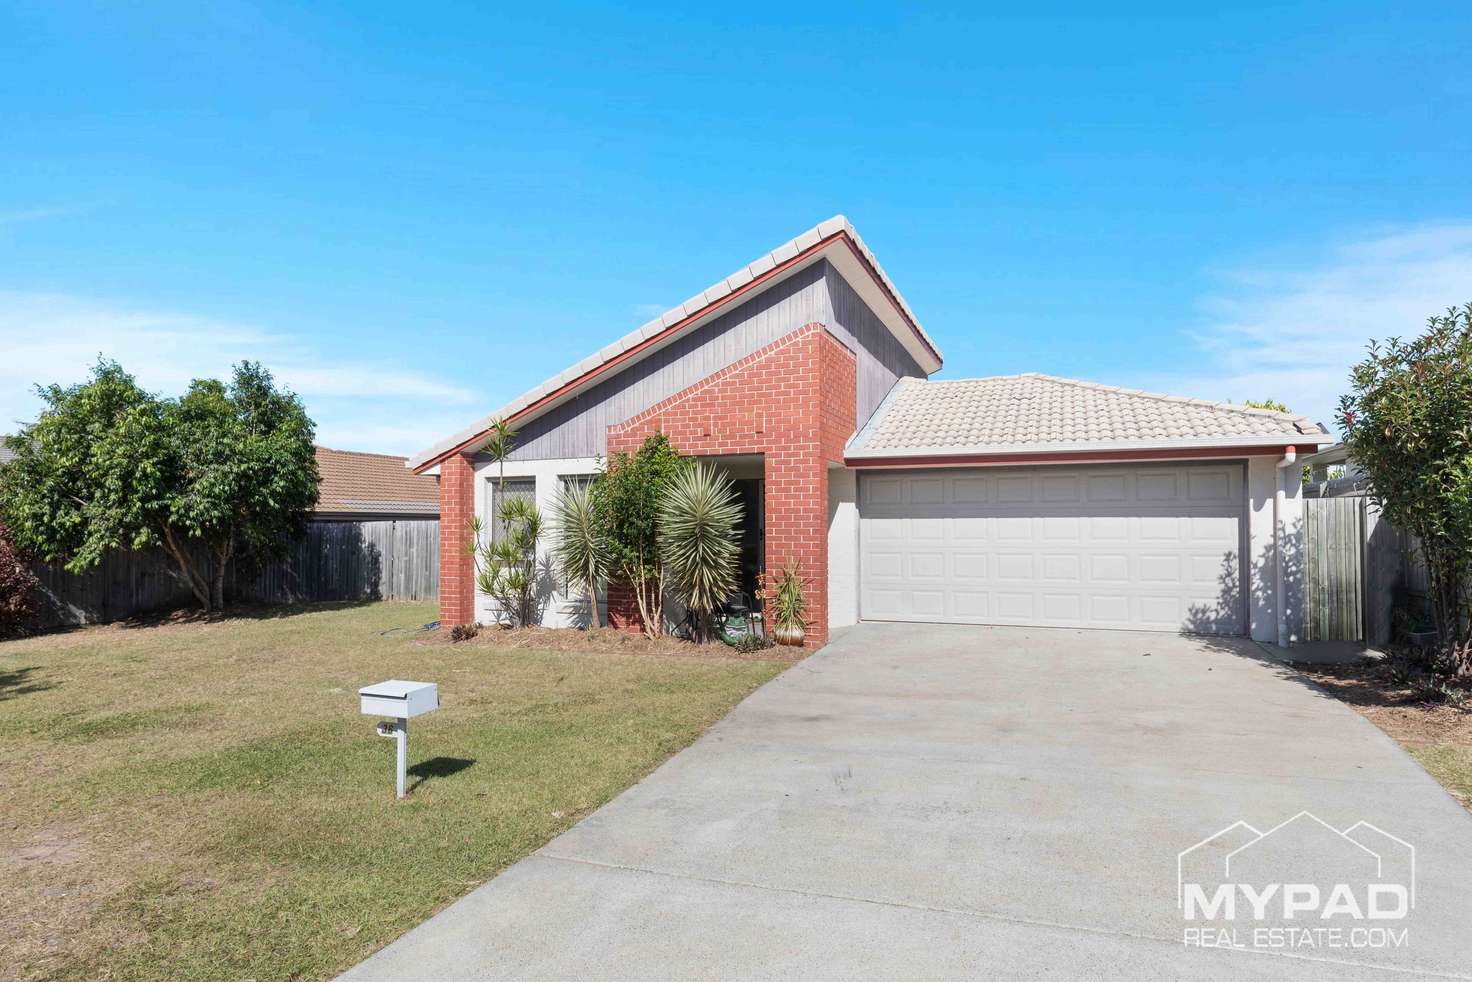 Main view of Homely house listing, 36 Lamberth Rd, Regents Park QLD 4118